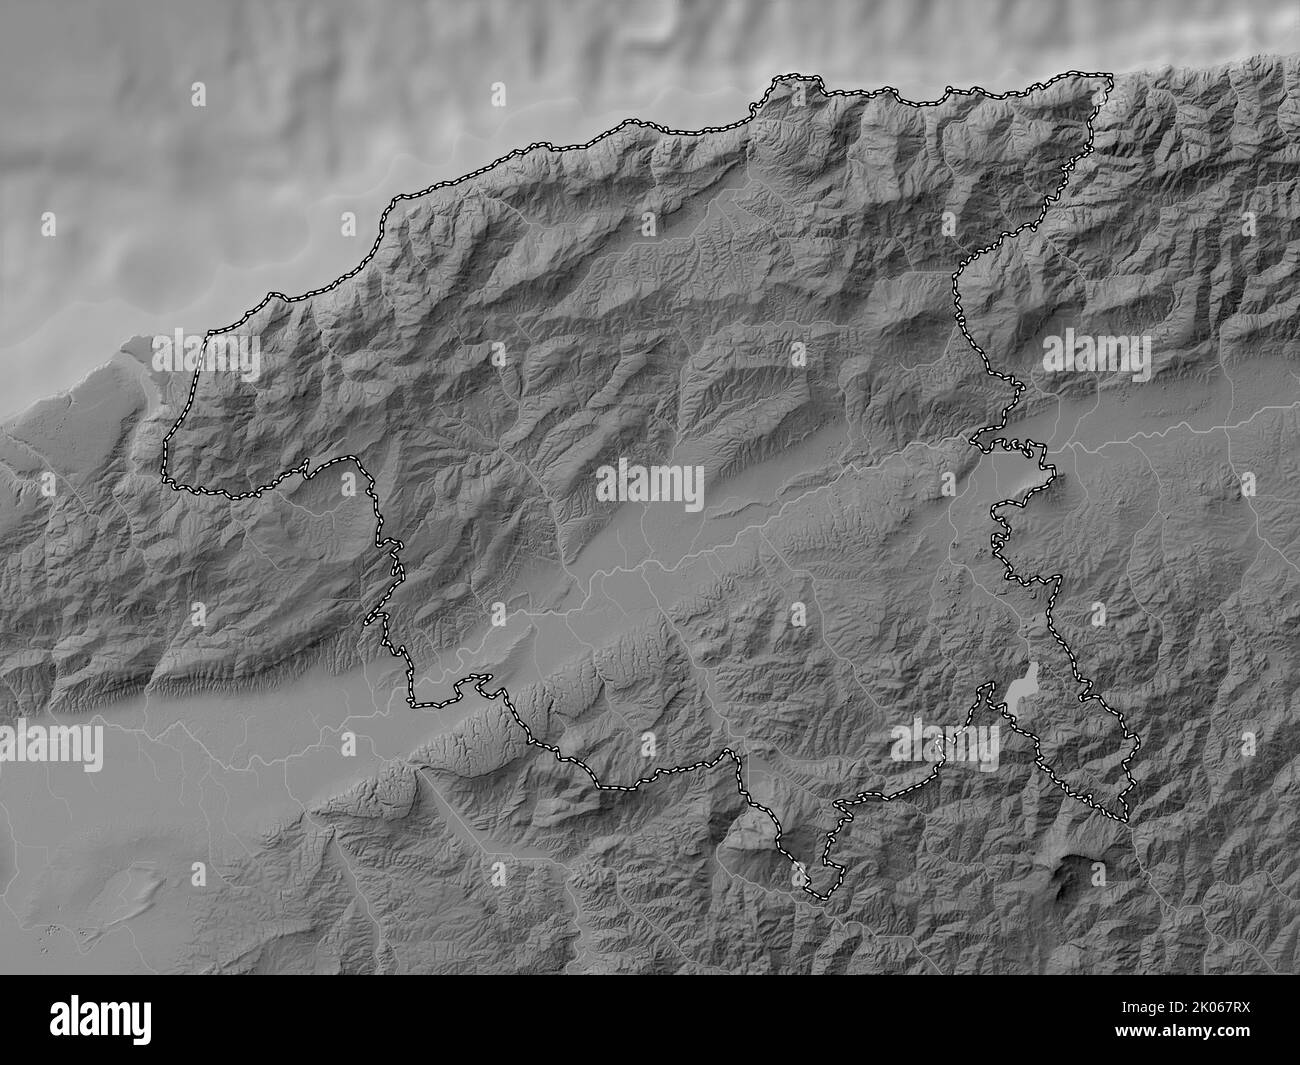 Chlef, province of Algeria. Grayscale elevation map with lakes and rivers Stock Photo